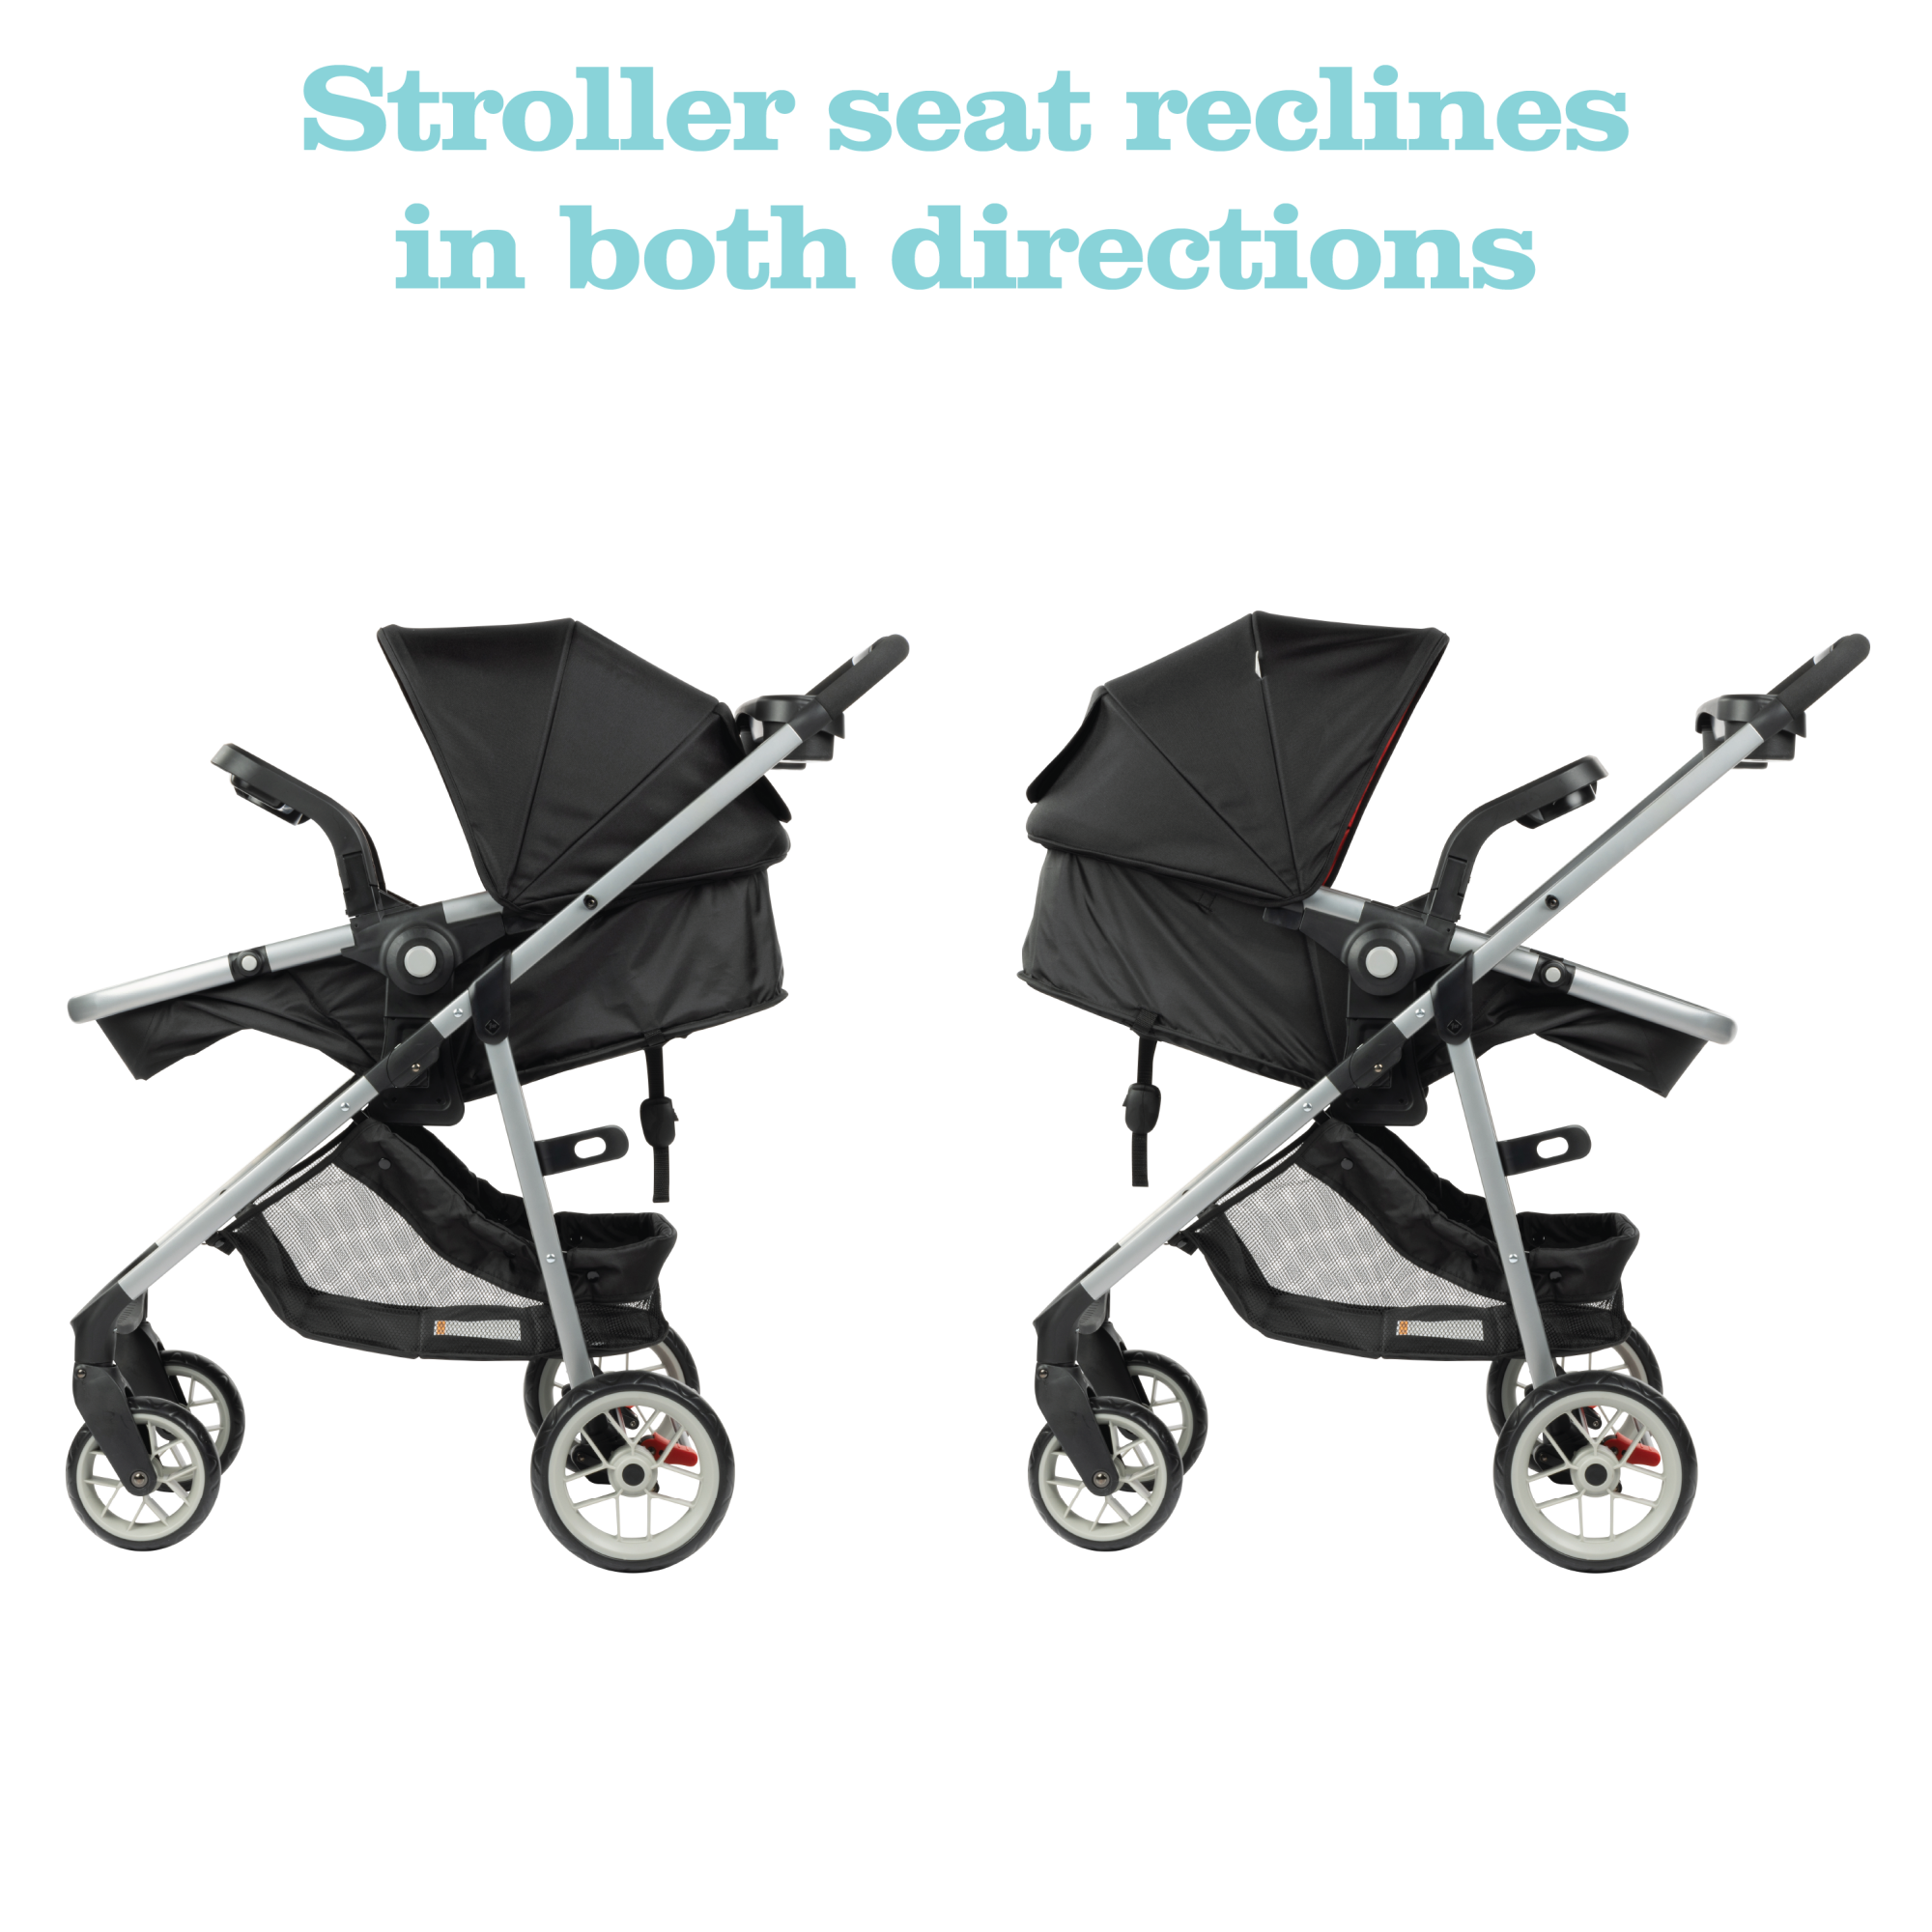 Disney Baby Grow and Go™ Modular Travel System - step-up bar and swing-away tray help independent toddlers climb in